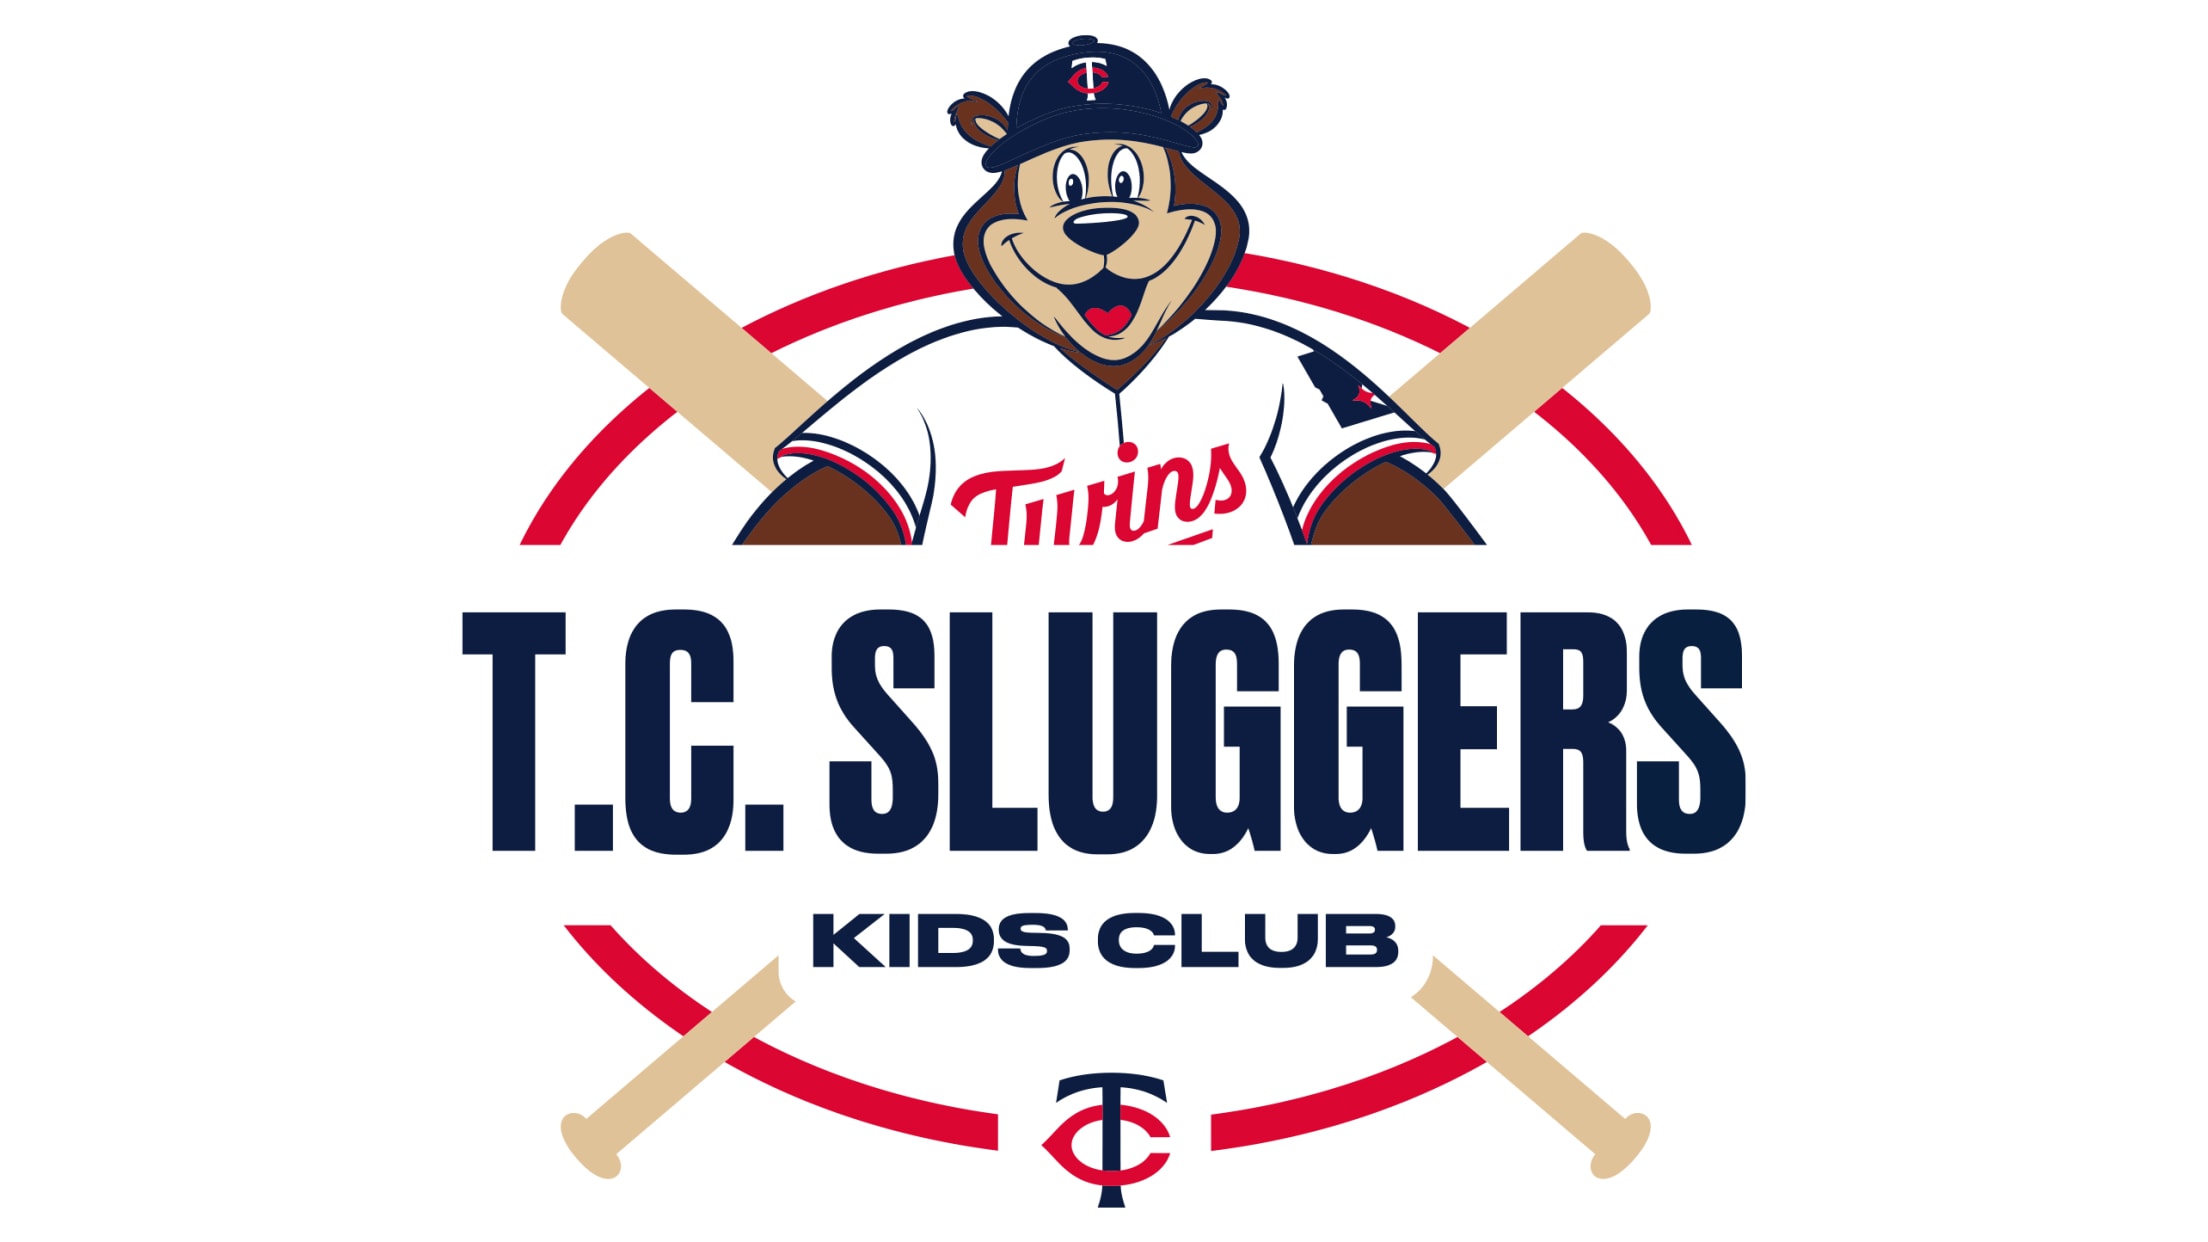 So you want to be T.C. Bear? The Minnesota Twins advertising for a new  mascot